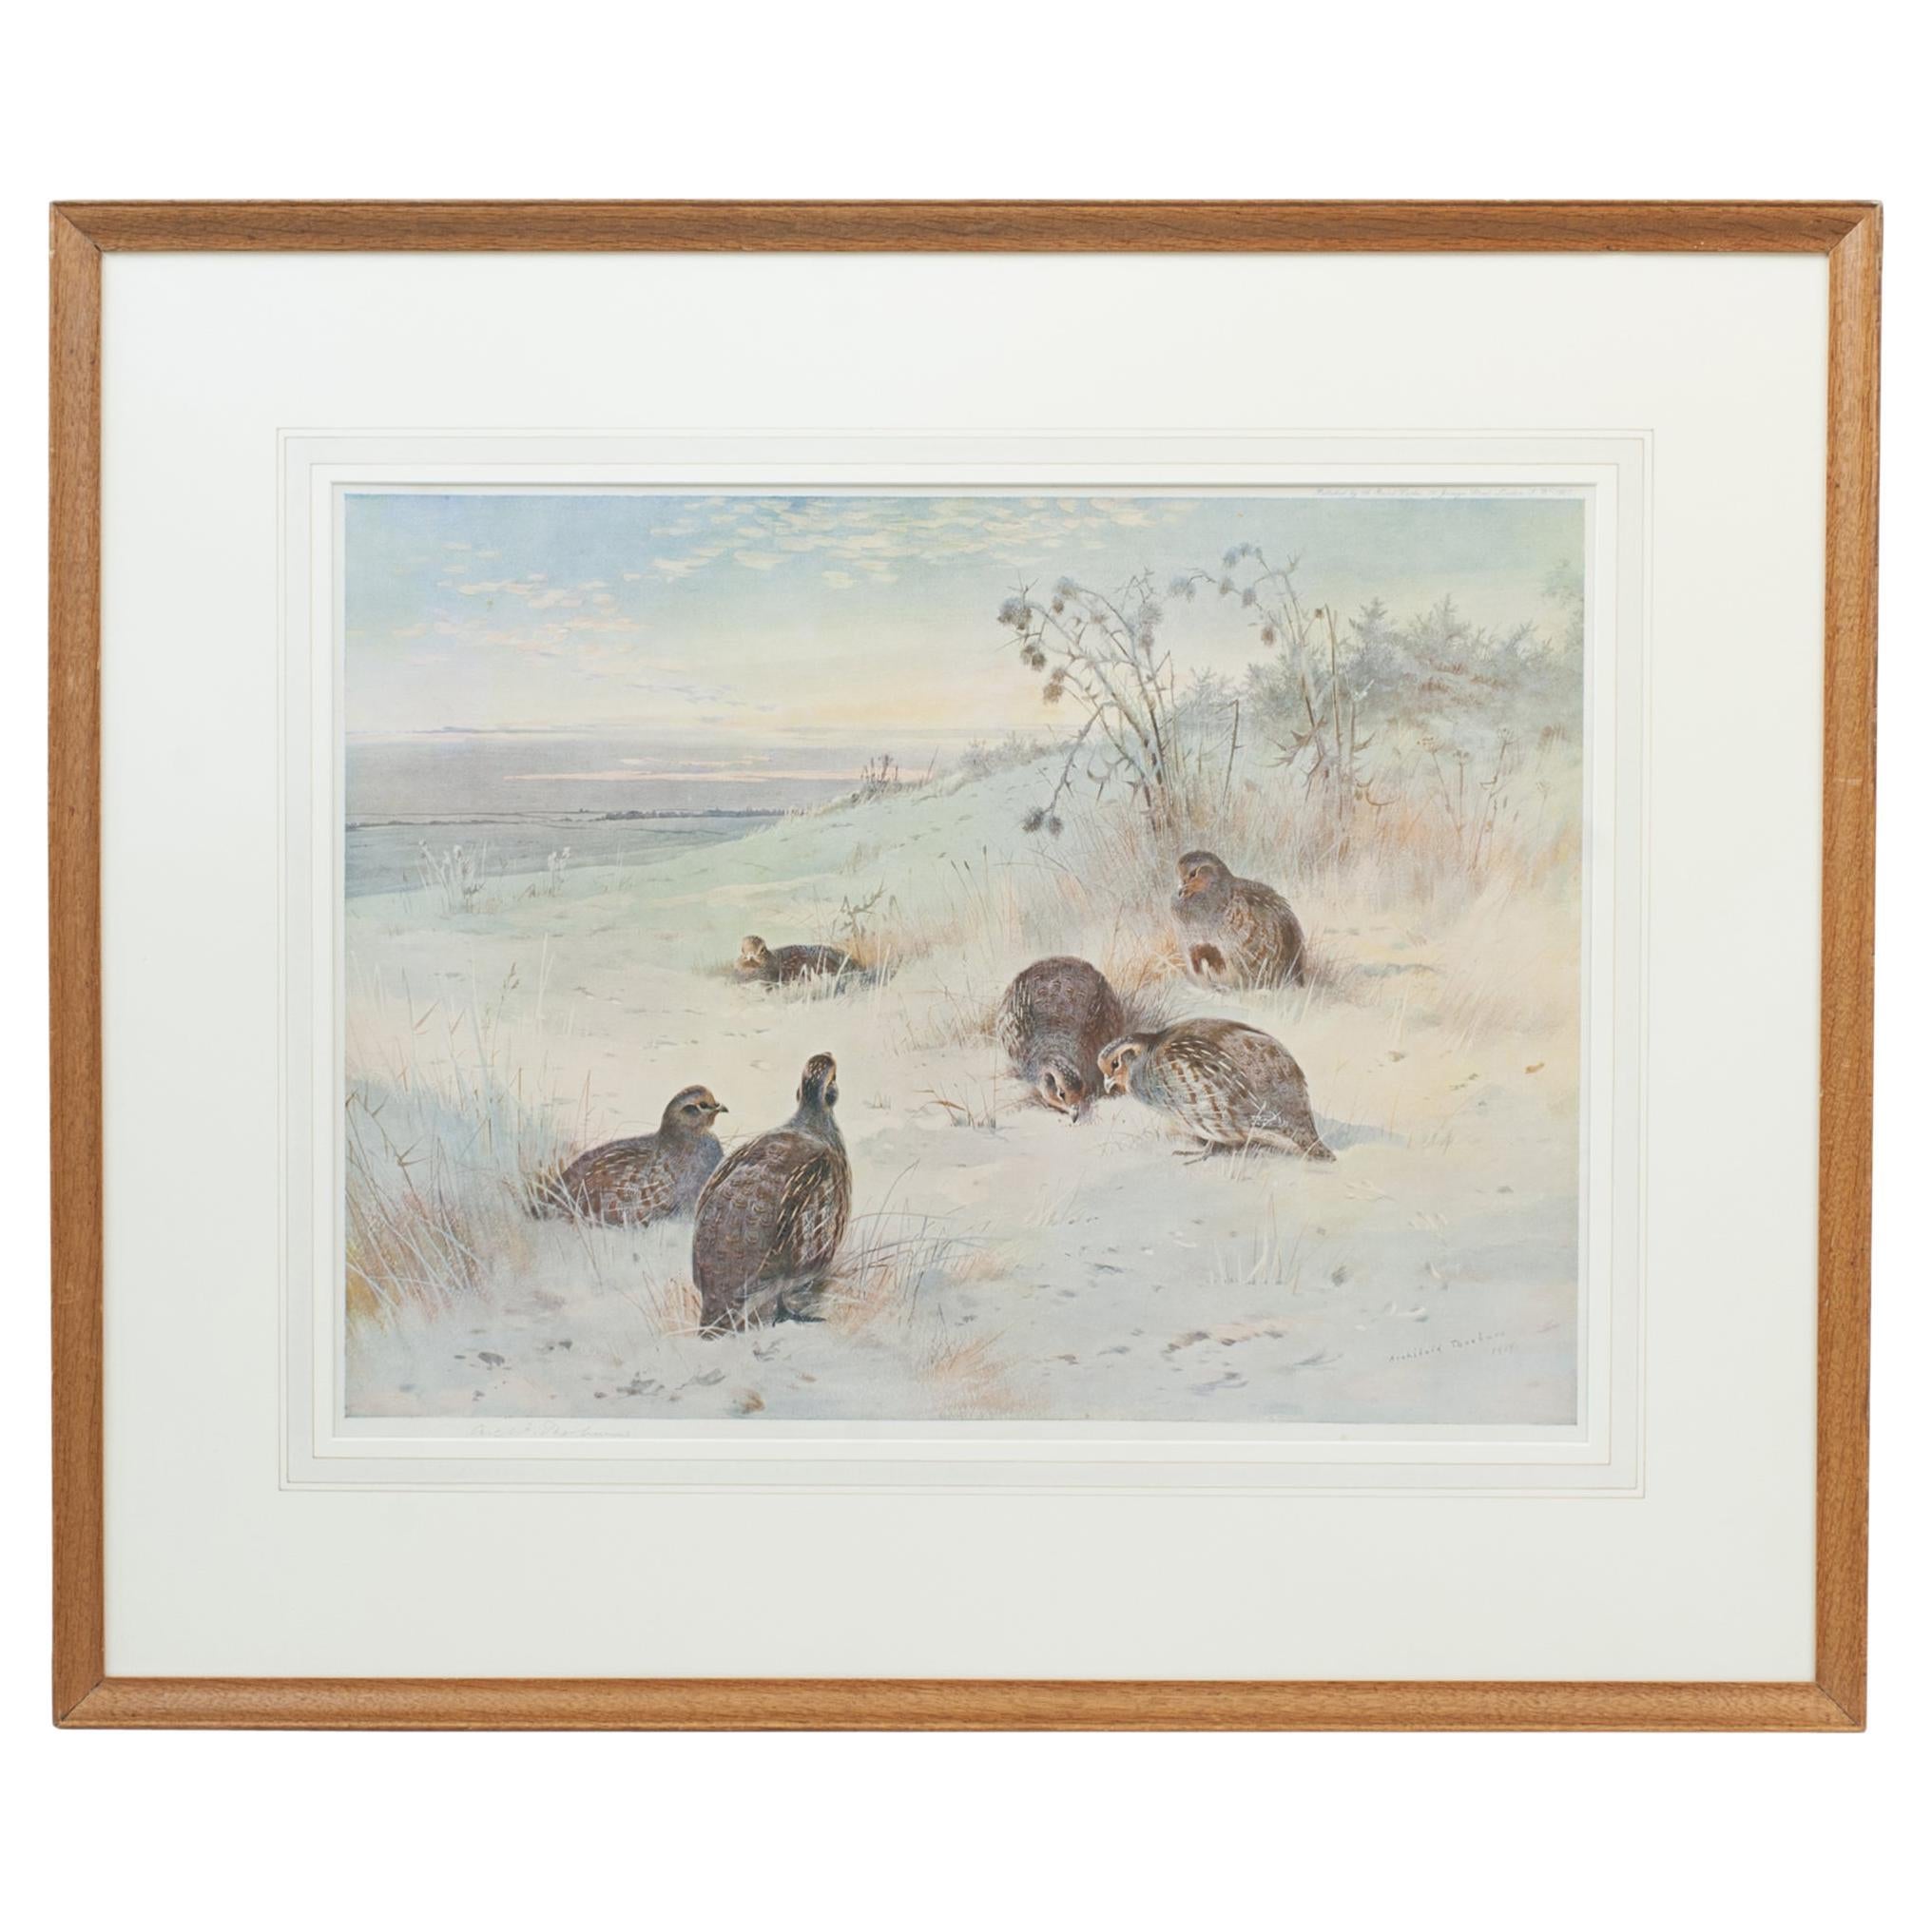 Antique Bird Print, Signed by Archibald Thorburn, Partridges, a Frosty Morning.